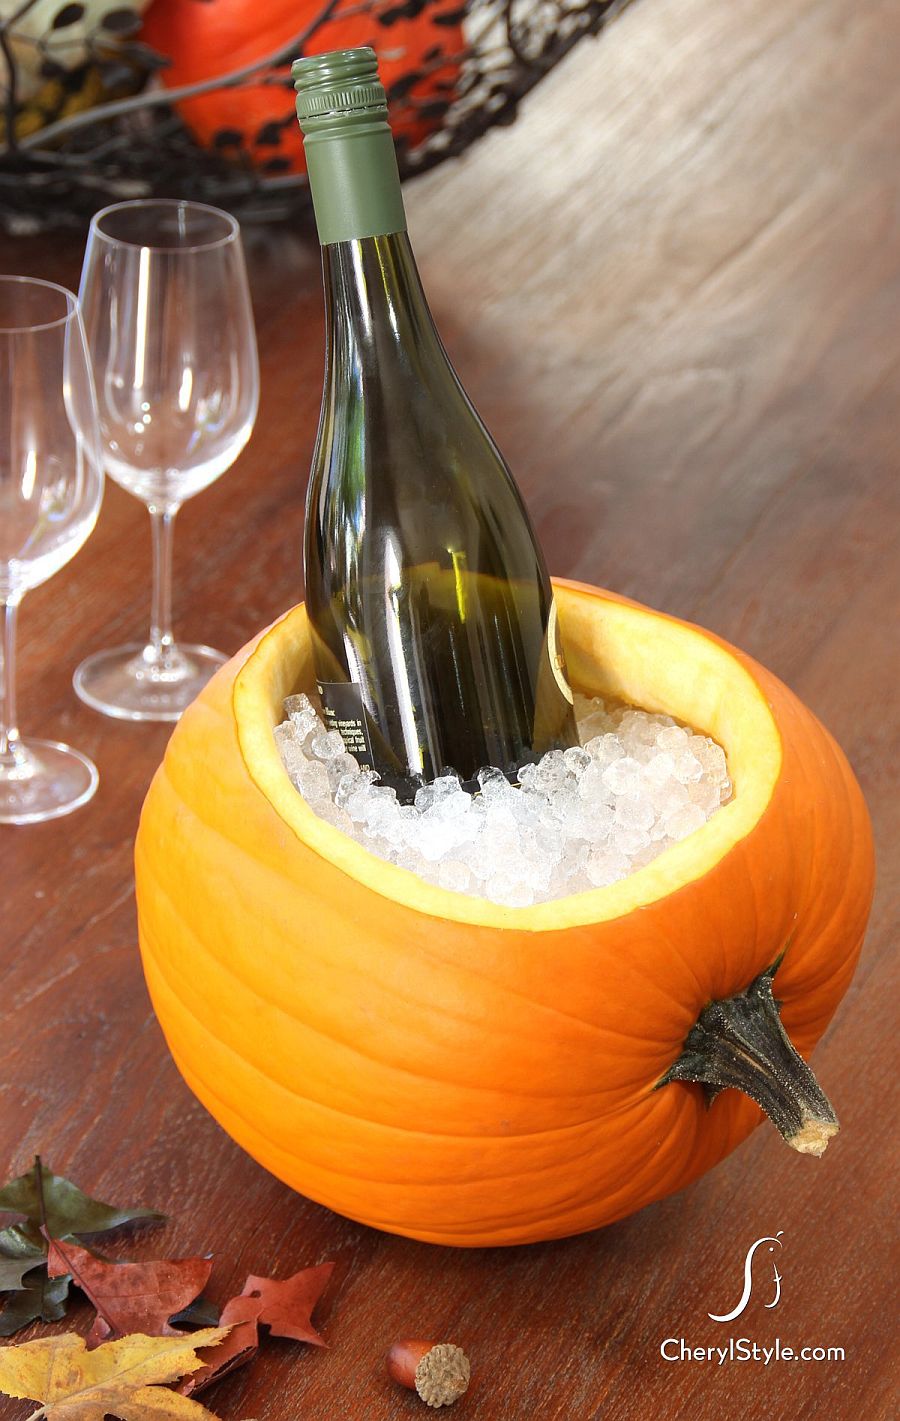 Carved wine cooler pumpkin for a fun Halloween [From: Cheryl Style]